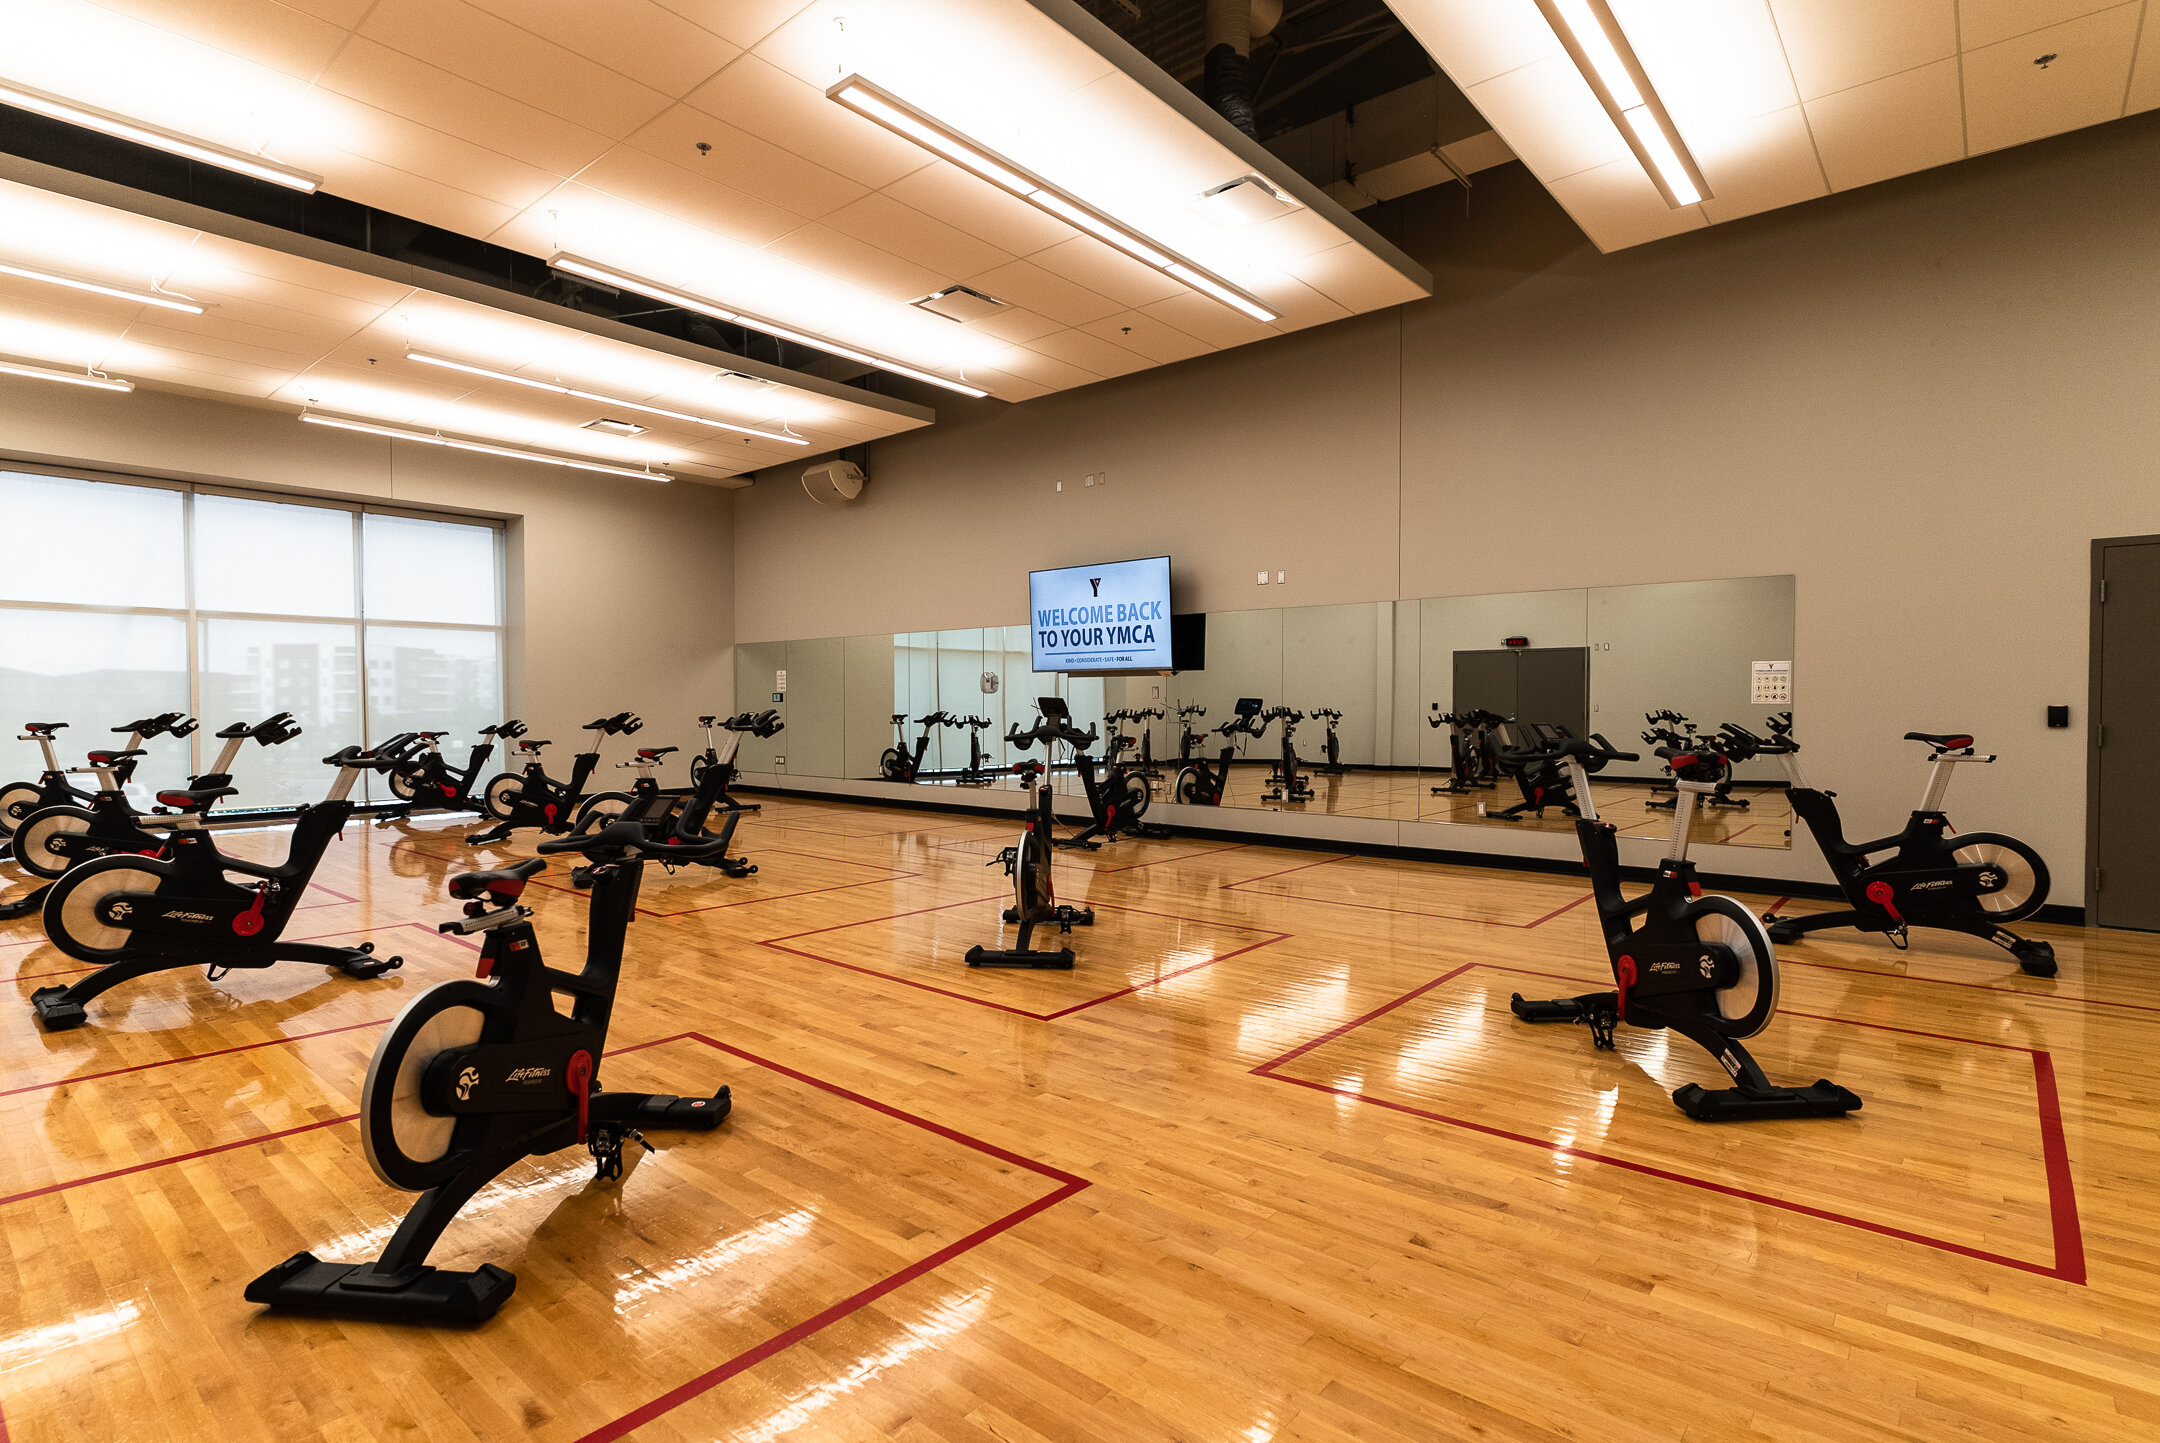  YMCA at Seton fitness studio with spin bikes, with audio and video system designed and installed for remote fitness options.  